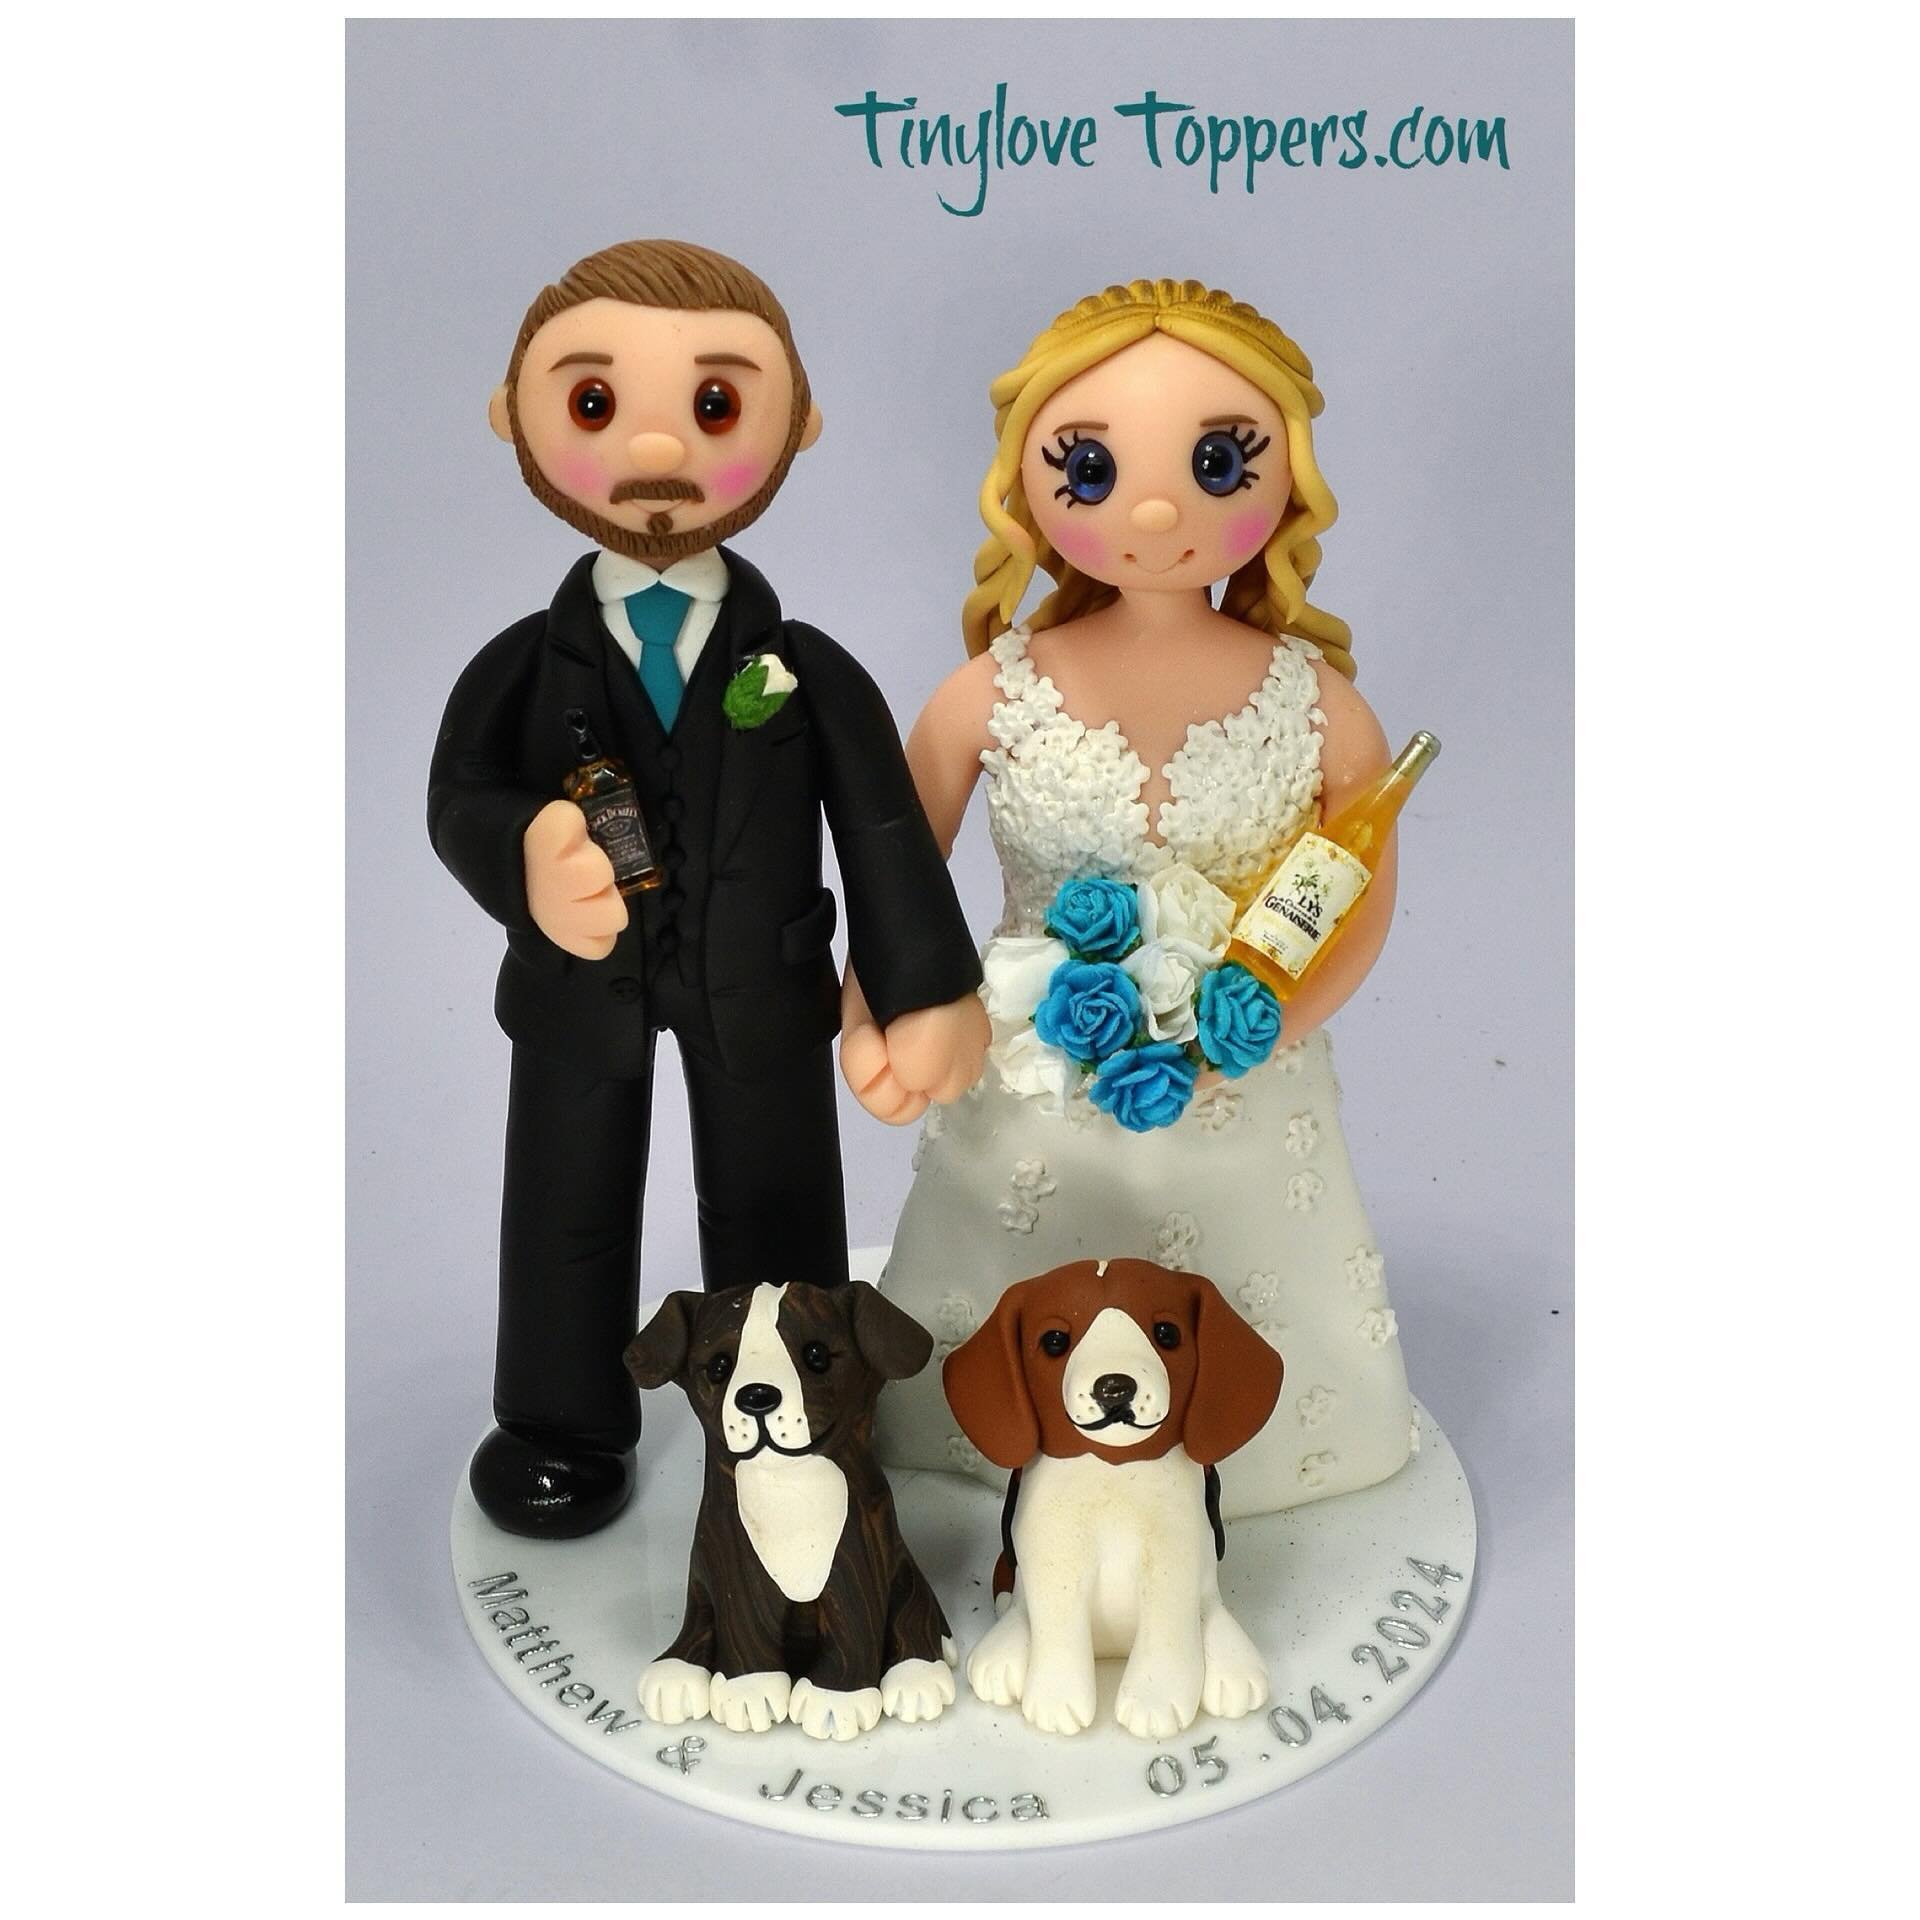 Are you getting married in 2024 or 2025?
would you like a personalised wedding cake topper that you can keep for a lifetime? 
Personalised non edible wedding cake toppers.
made to look like you, lifelong keepsakes.
Message me if you would like a quot